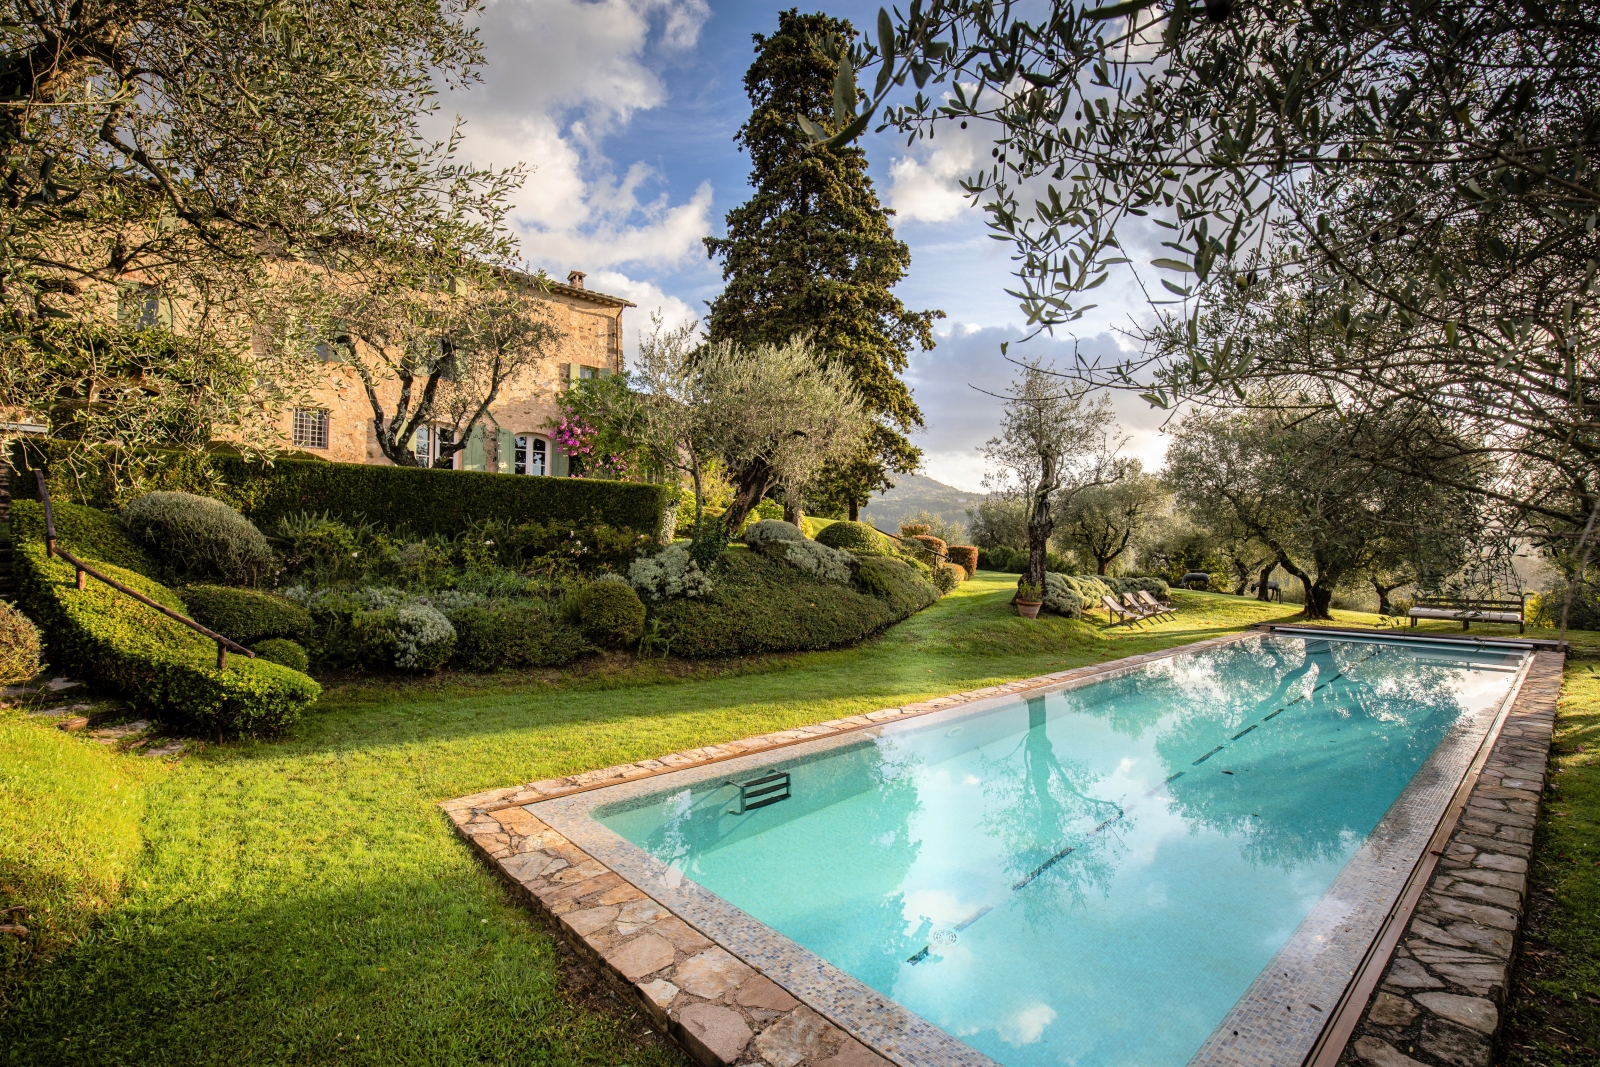 Villas in Lucca - Pool and garden at Villa Ortensia in Tuscany, Italy